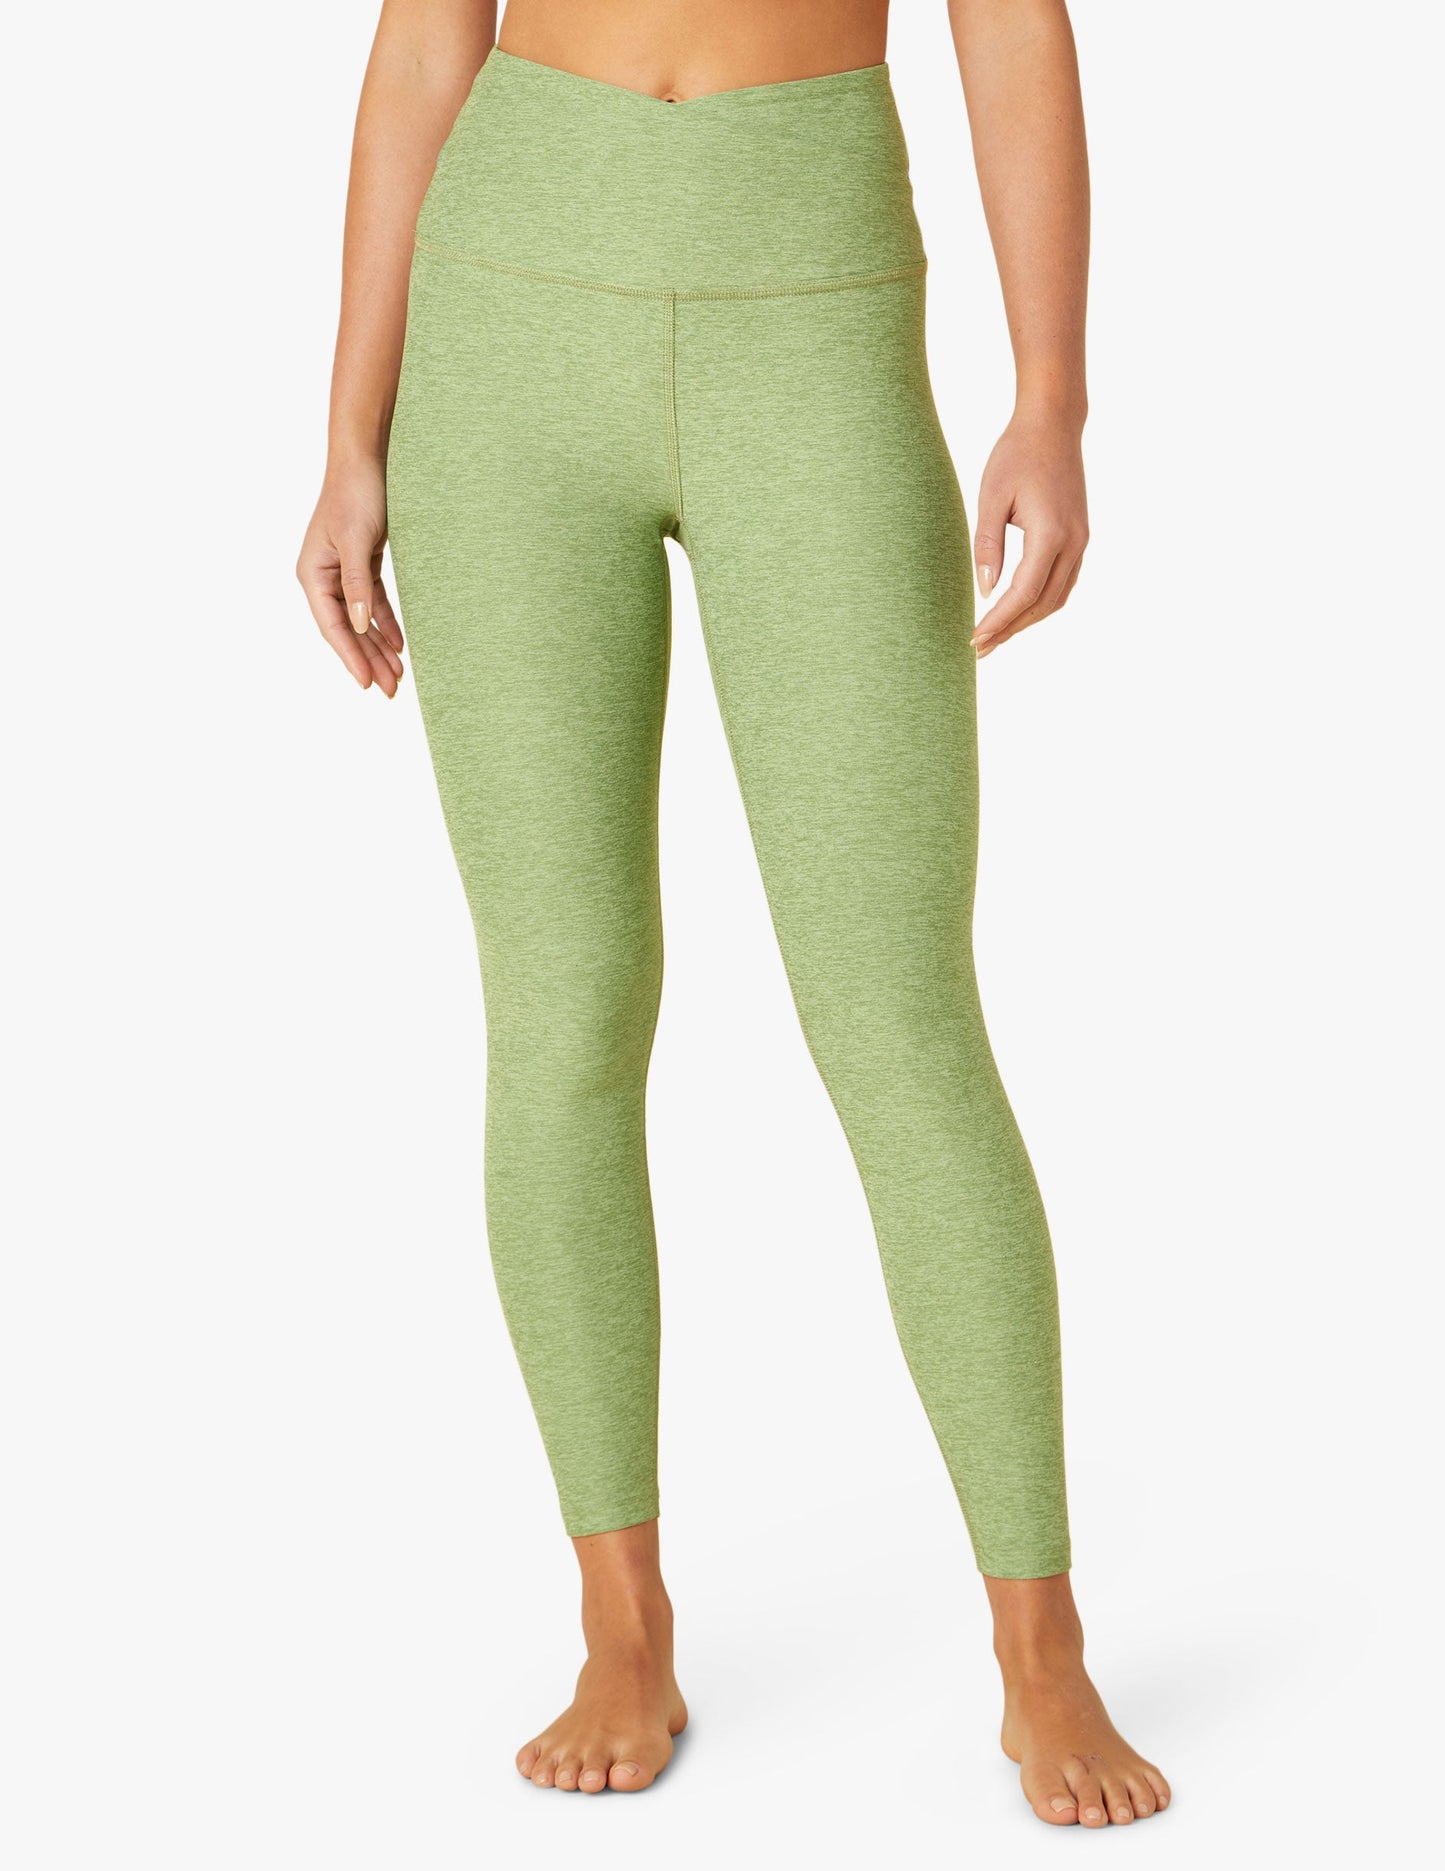 BEYOND YOGA SPACEDYE AT YOUR LEISURE HIGH WAISTED LEGGING ROSEMARY HEATHER